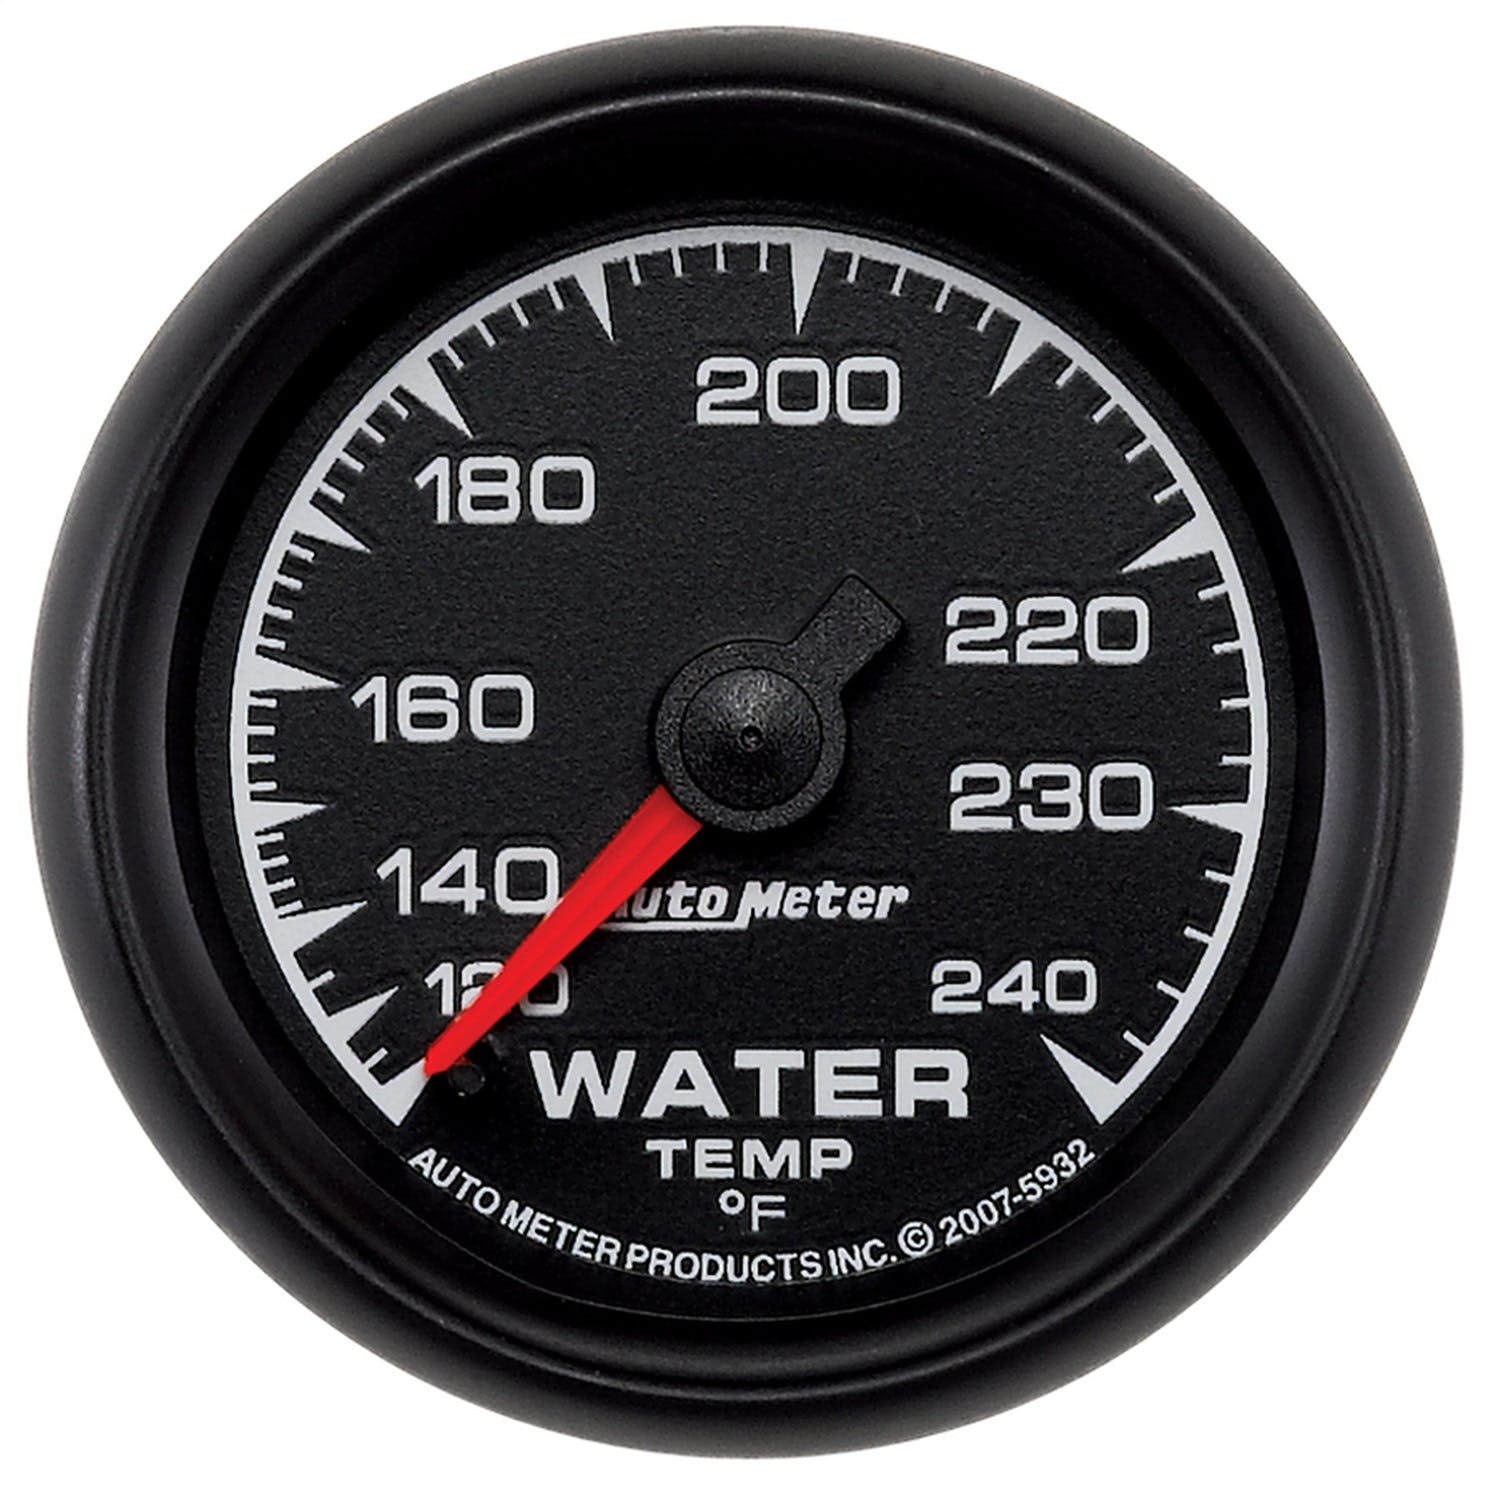 AutoMeter Products 5932 2-1/16in Water Temp 120- 240 F Mechanical